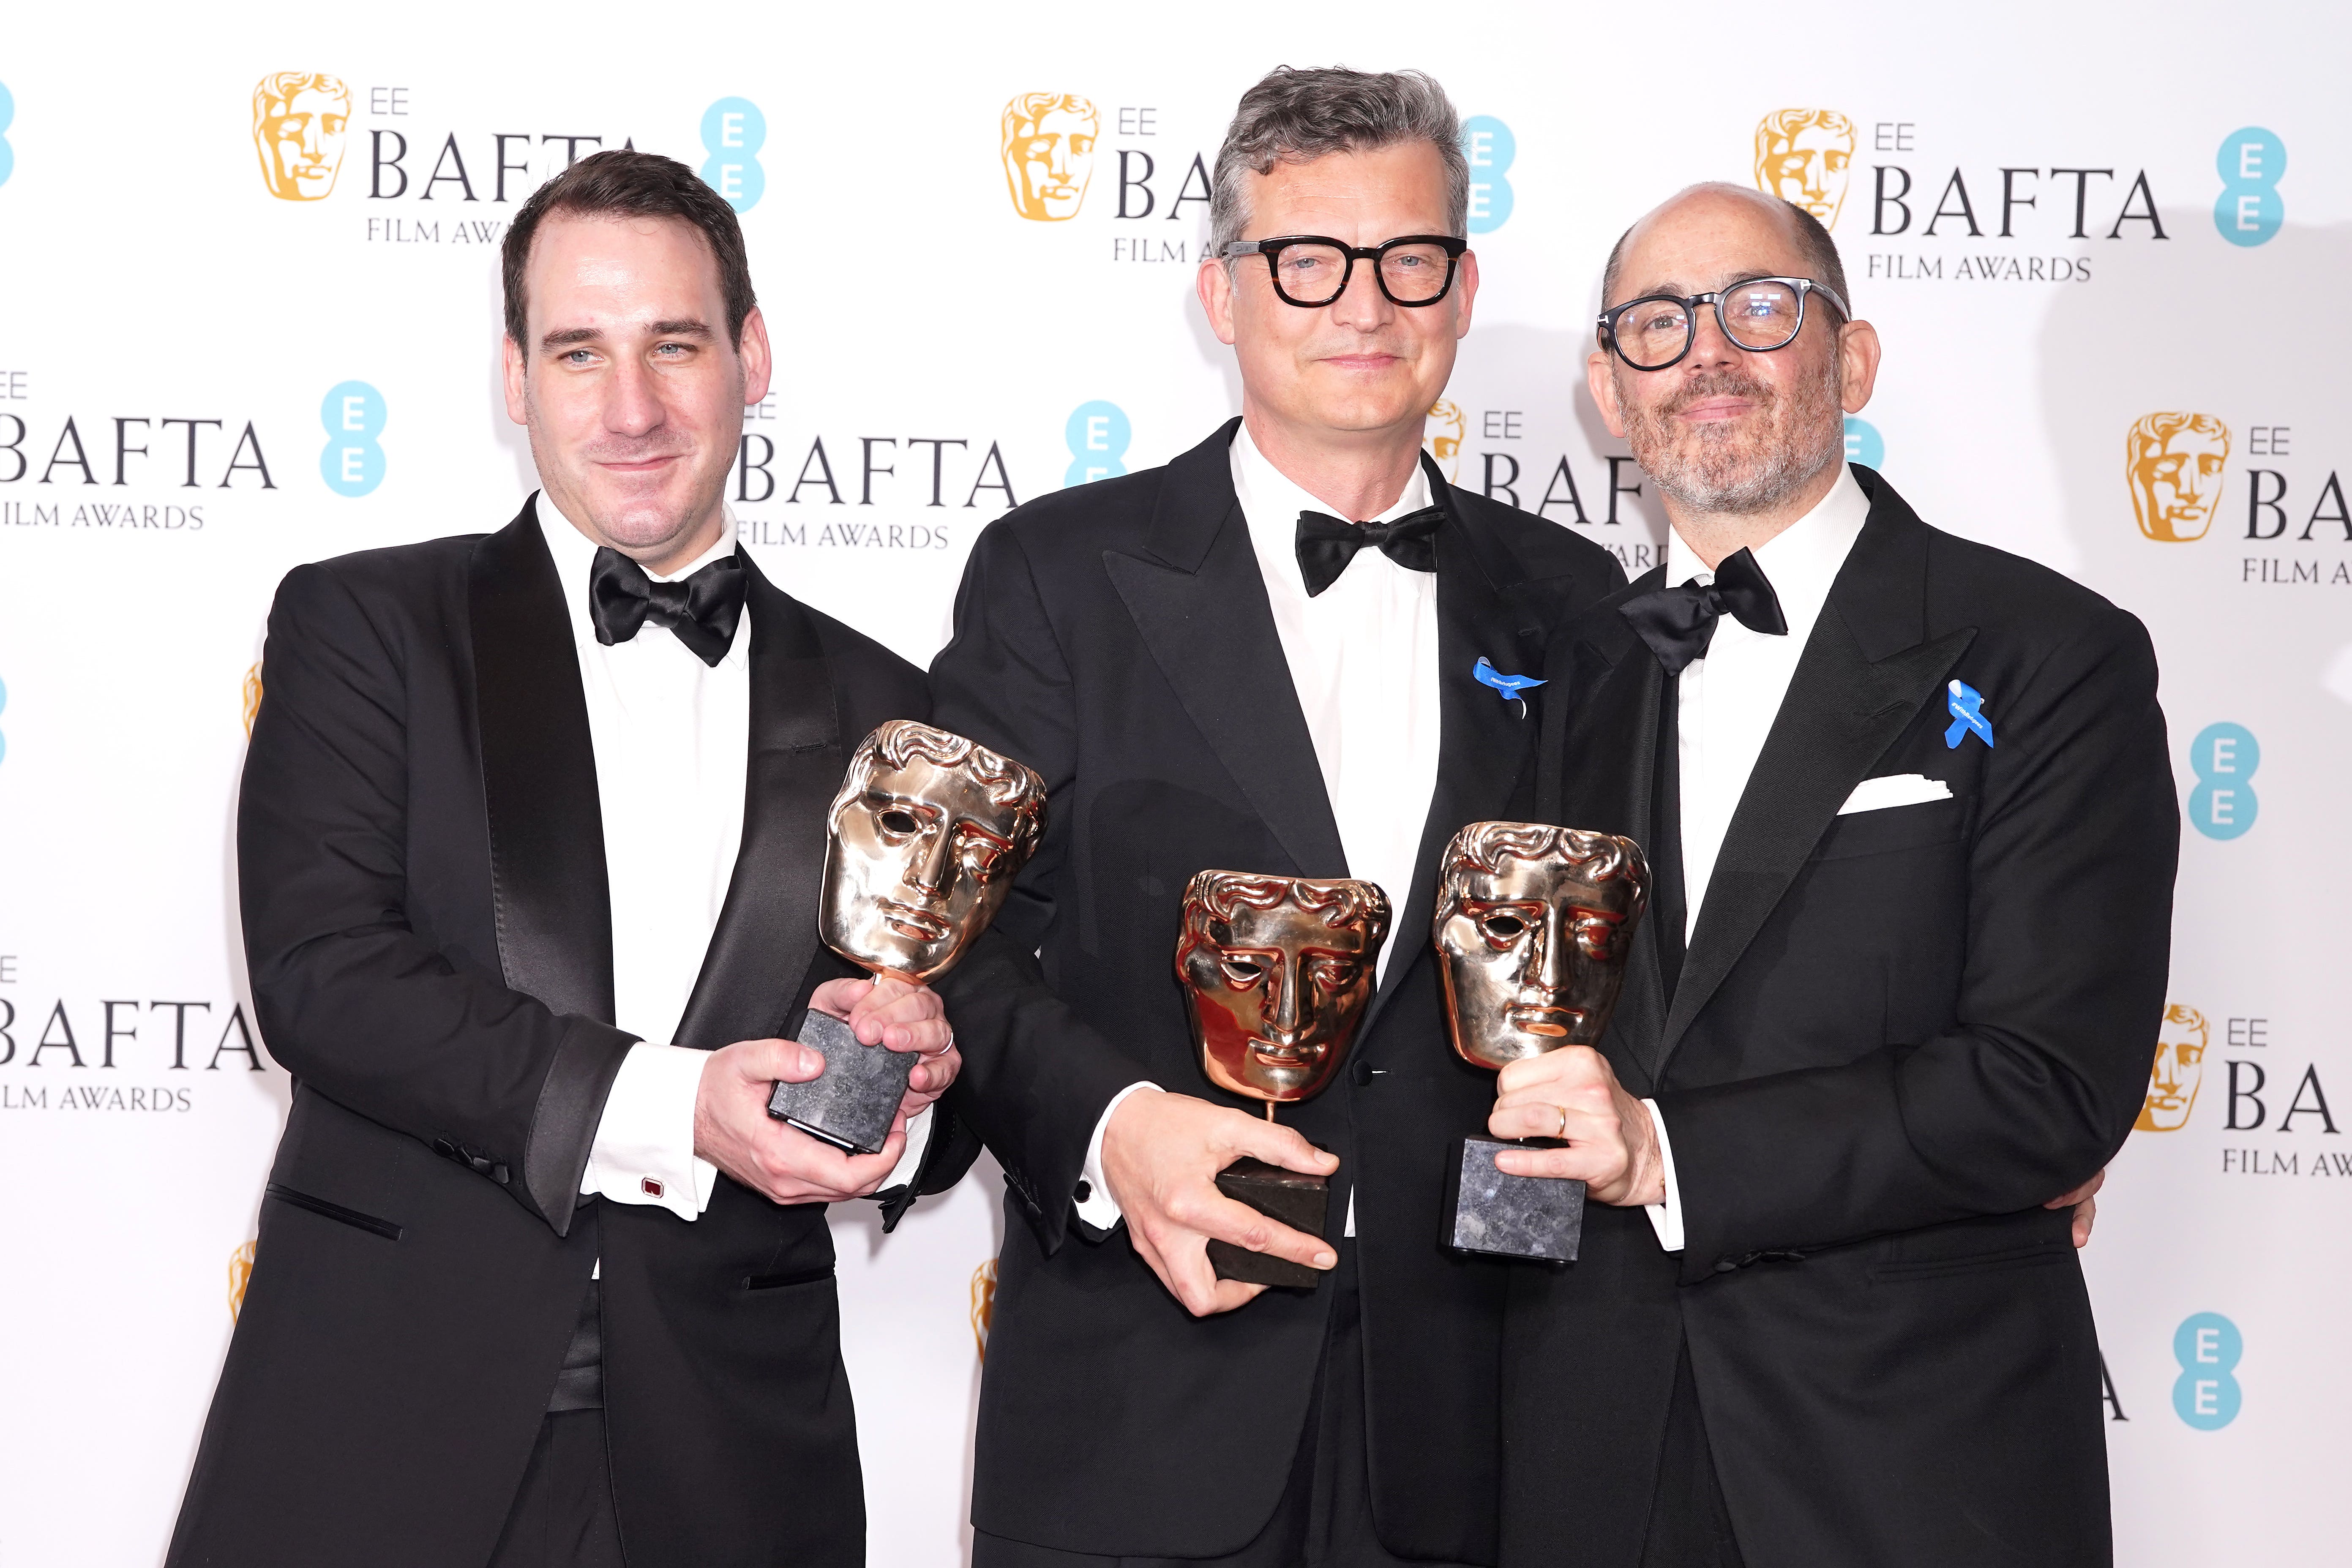 From left, James Friend, Malte Grunert and Edward Berger wotj their Baftas for All Quiet on the Western Front (Ian West/PA)